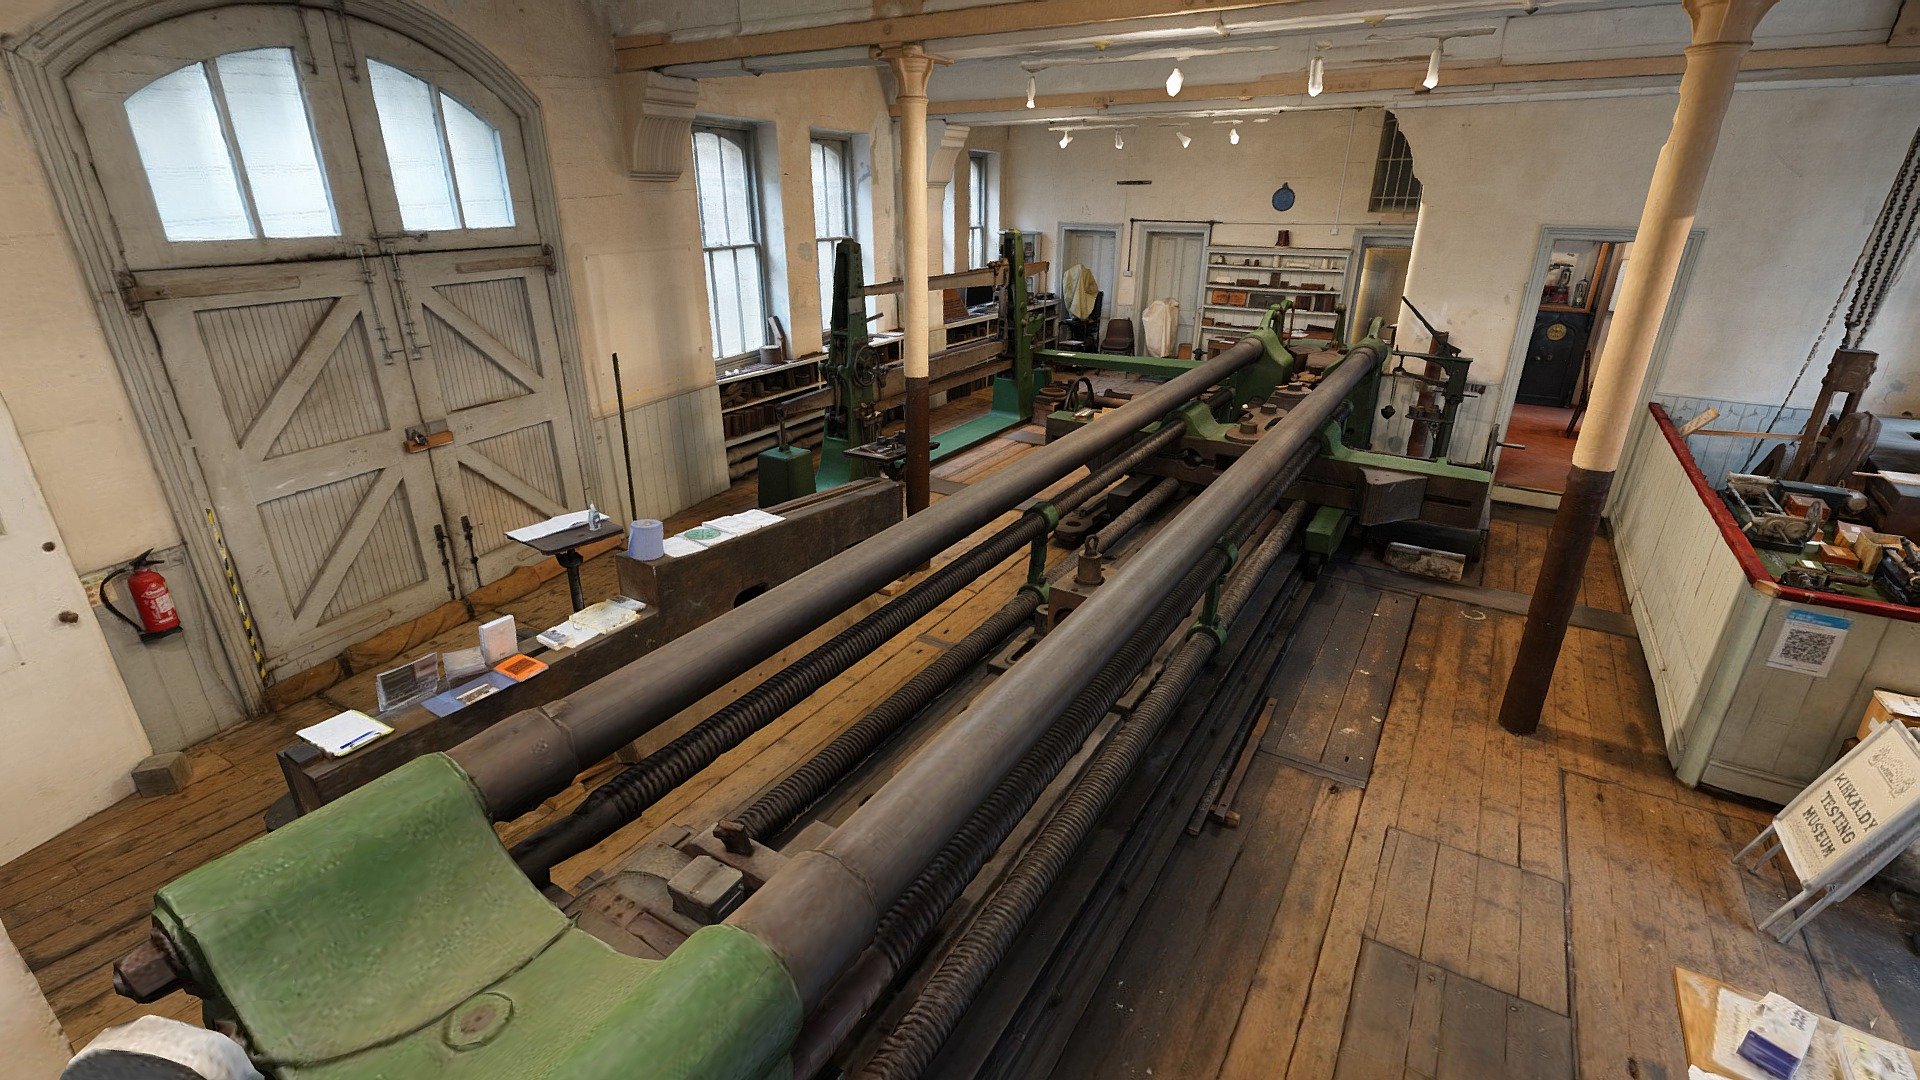 On 1 January 1874 Scottish engineer David Kirkaldy opened the world’s first purpose-built, independent commercial materials testing house at 99 Southwark Street London. Inside, his patented 116-ton hydraulic-powered Universal Testing Machine could exert a force of up to 1,000,000lb, bringing rigorous new understanding to the strength of construction materials. Outside, he declared his independence over the door, ‘Facts Not Opinions’. The machine, and his challenge, are still there today.

https://www.testingworks.org.uk/

Thank you to trustees for assistance and permission to capture this location.

16629 photos taken in September 2021 with a Sony a7R III and processed in Reality Capture 3d model